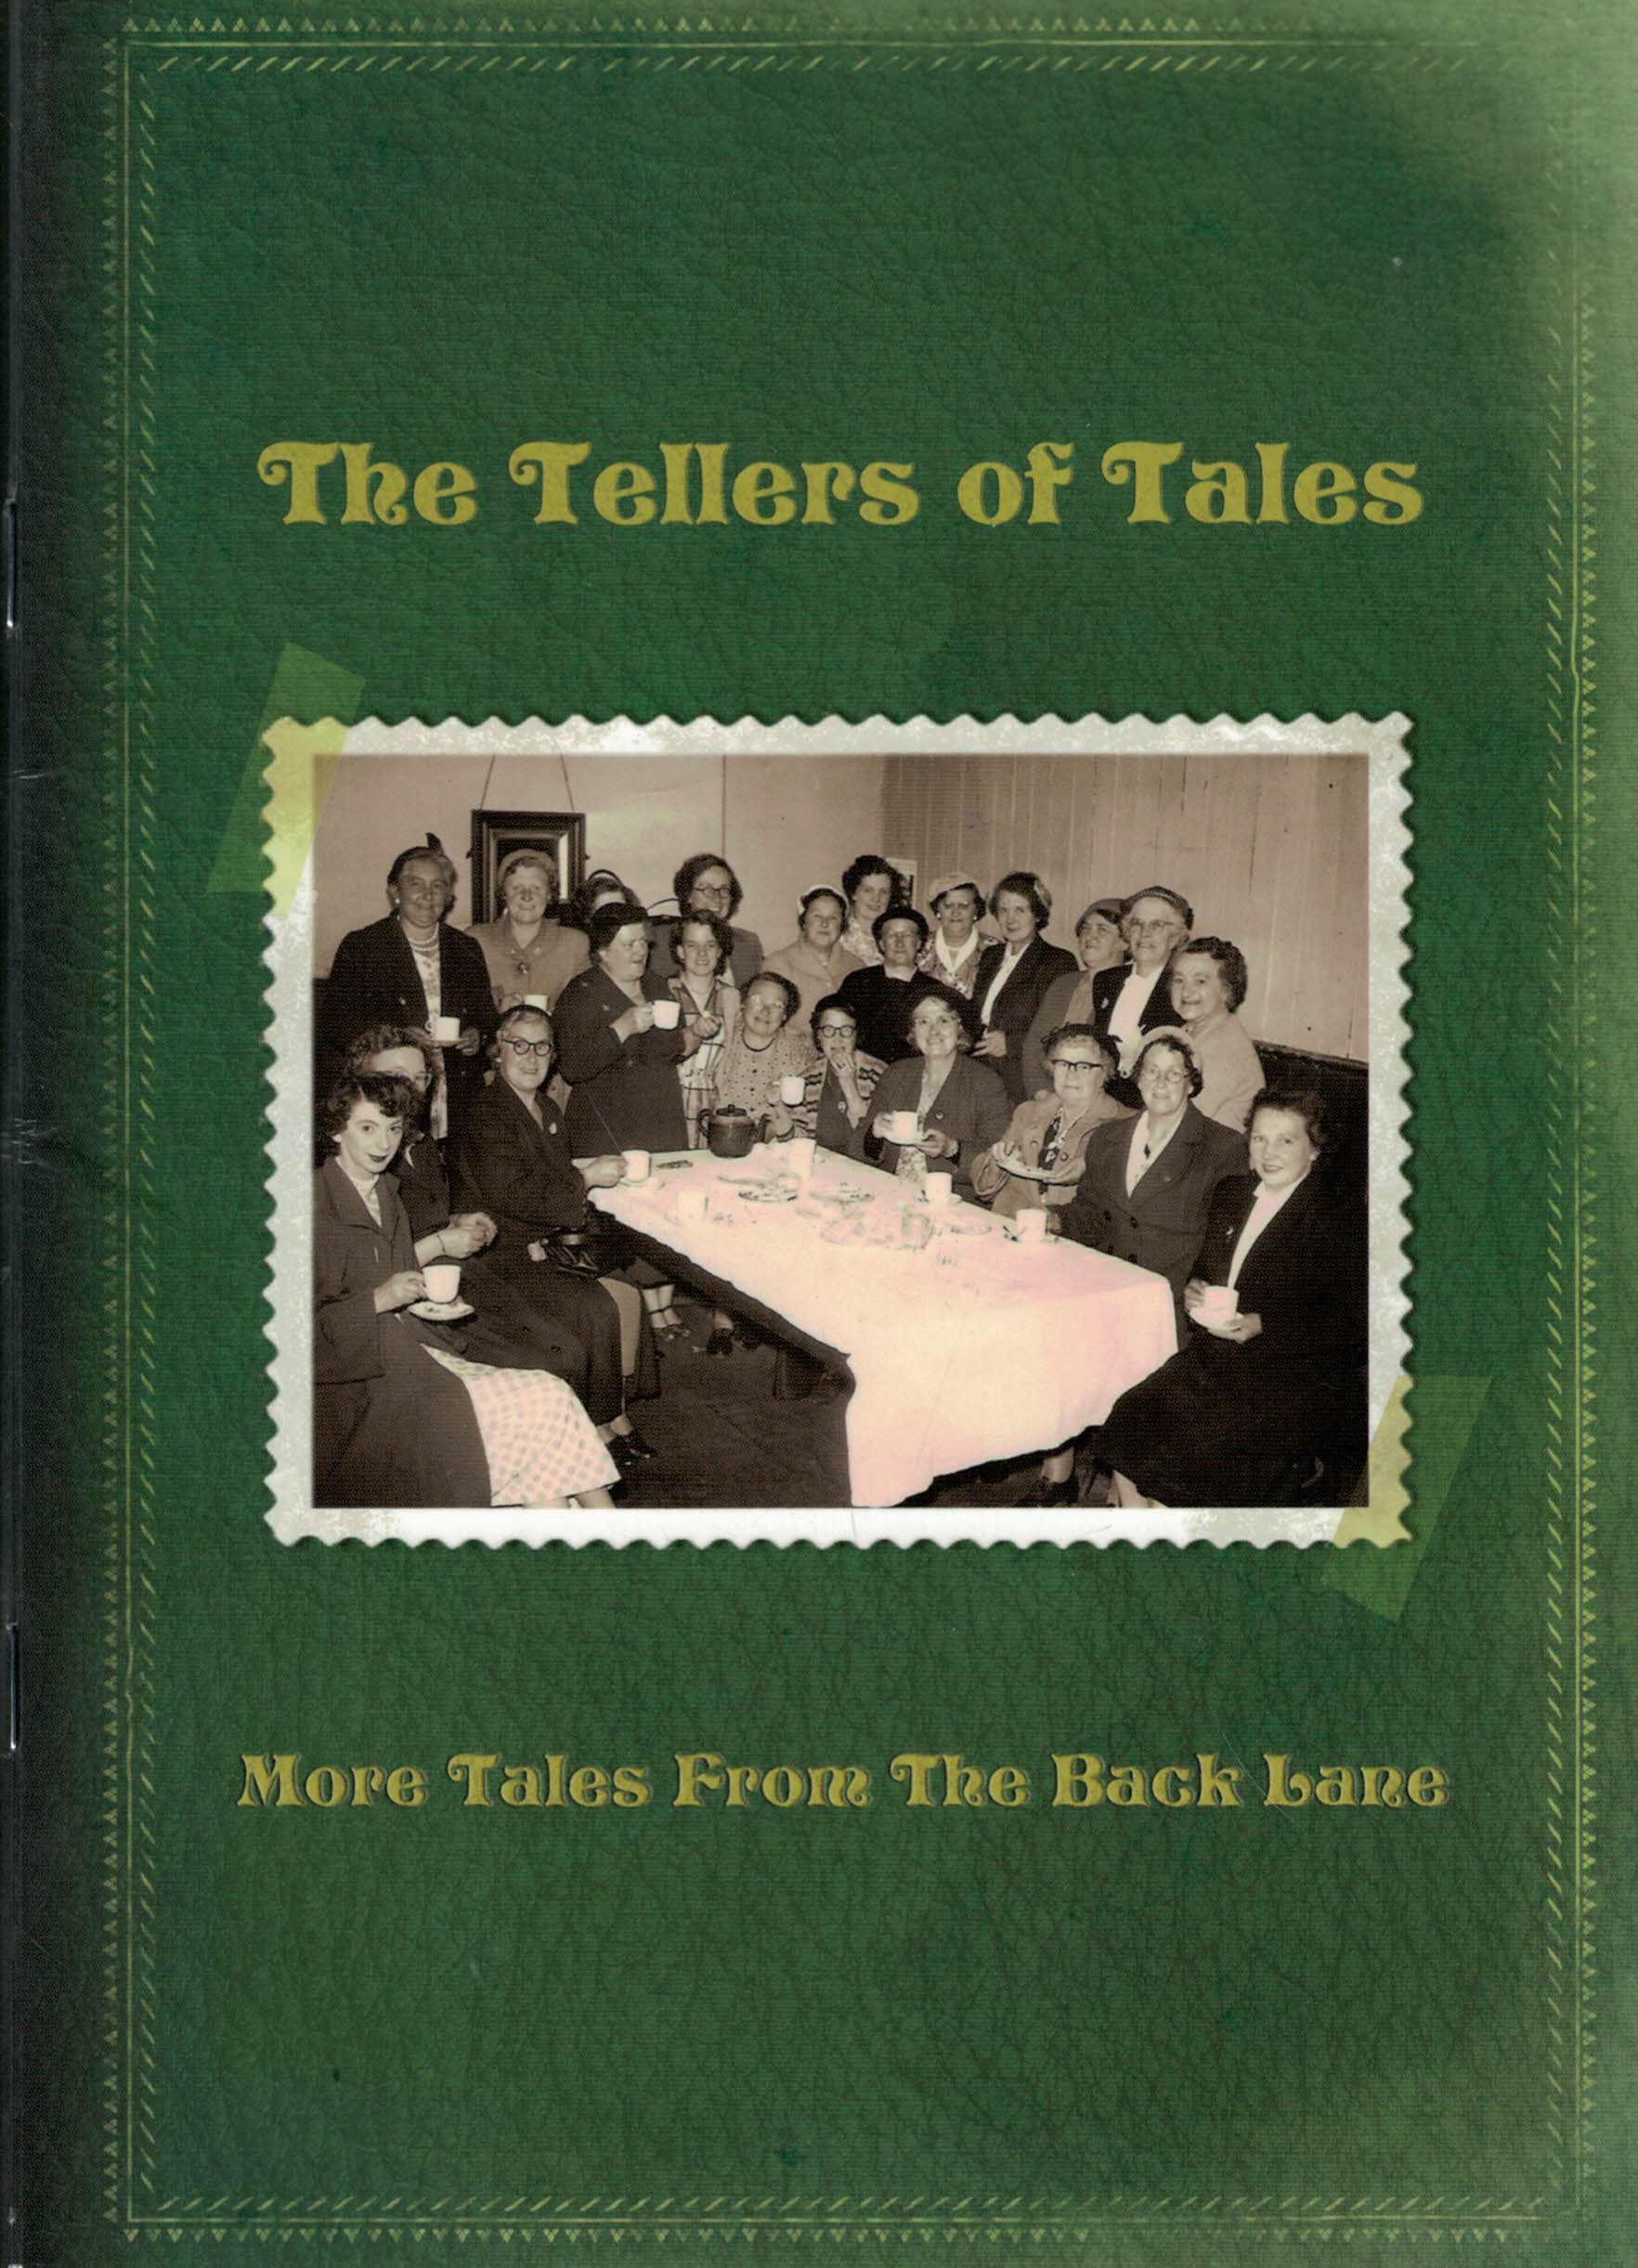 ICCQ - The Tellers of Tales. More Tales from the Back Lanes. Signed Copy